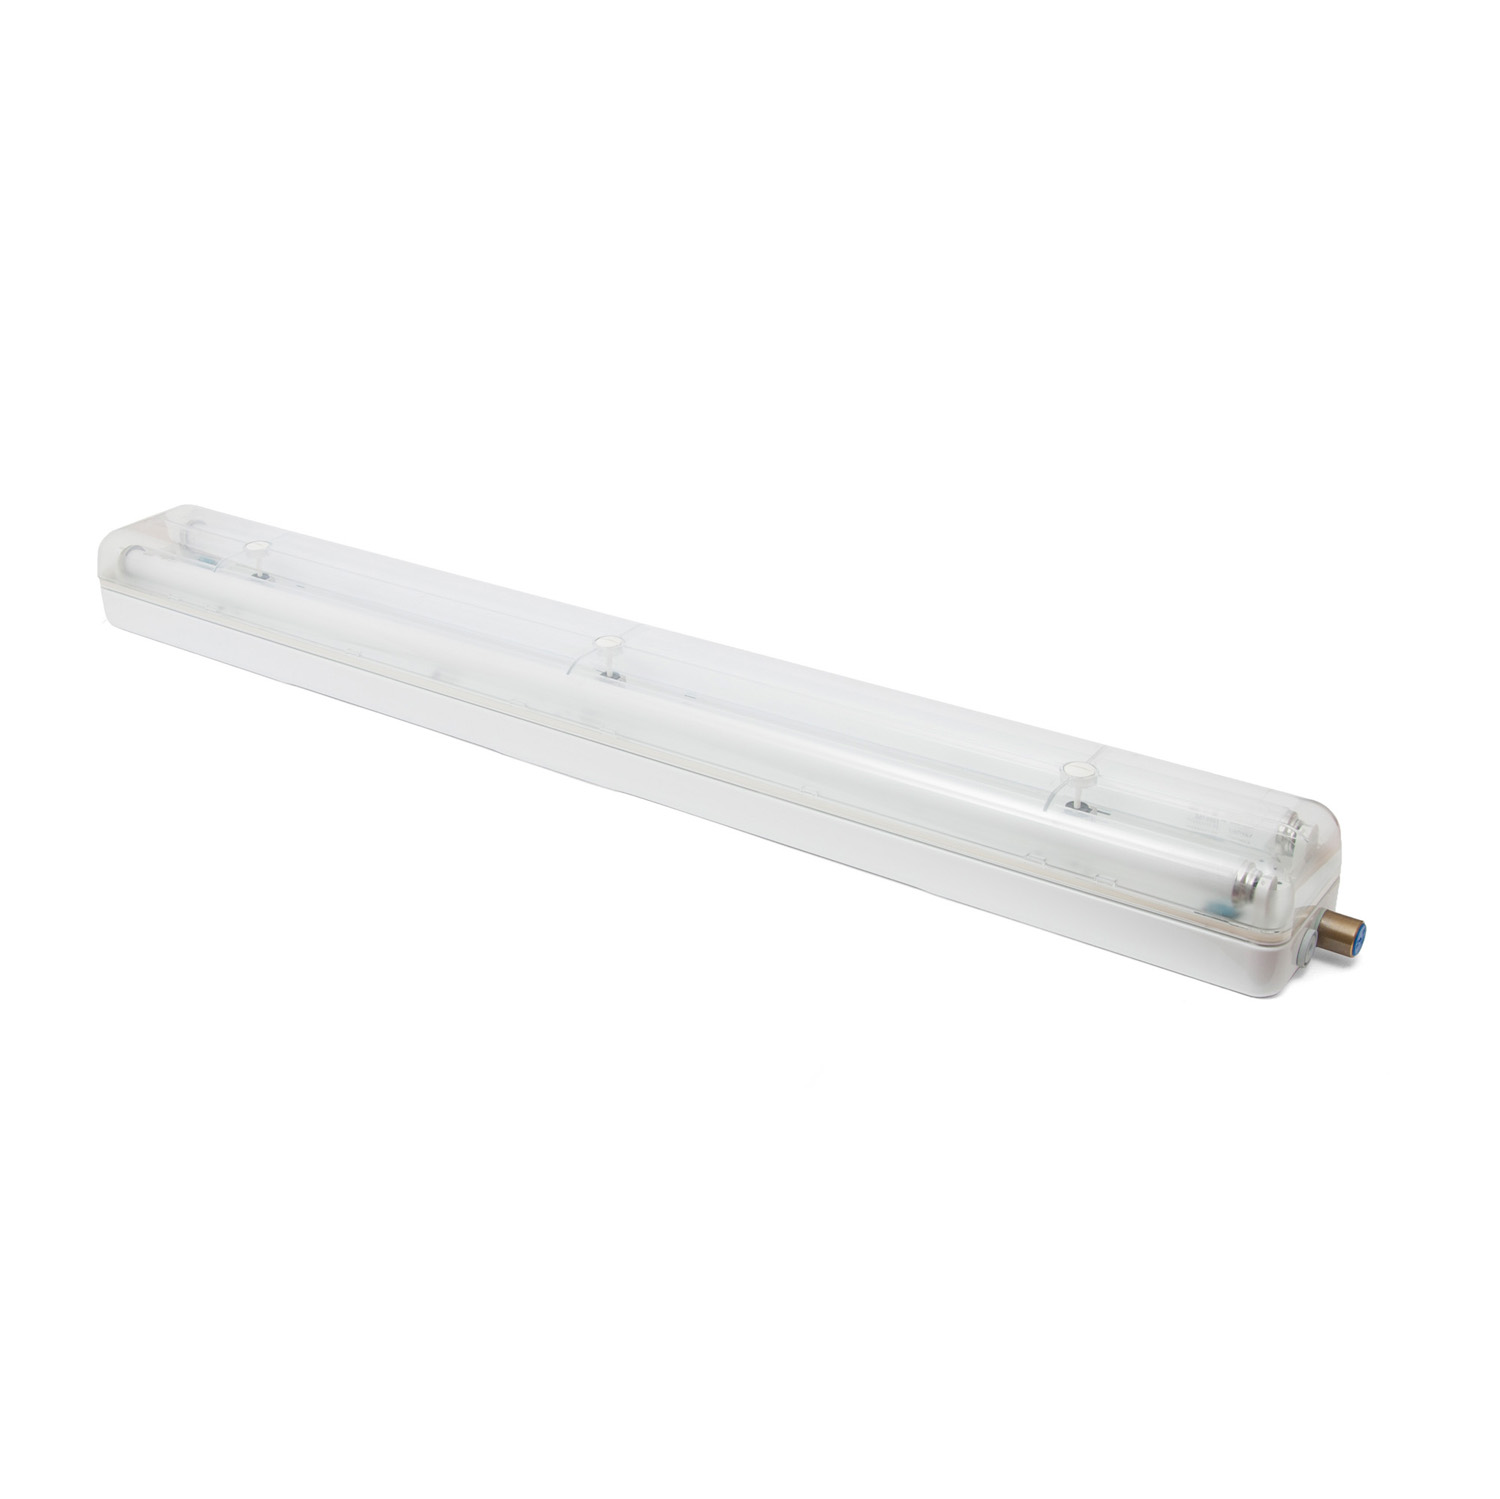 1891402201 Coldroom luminair surface, 2x36W, 230V 50Hz, IP55, incl. thermo tubes T38